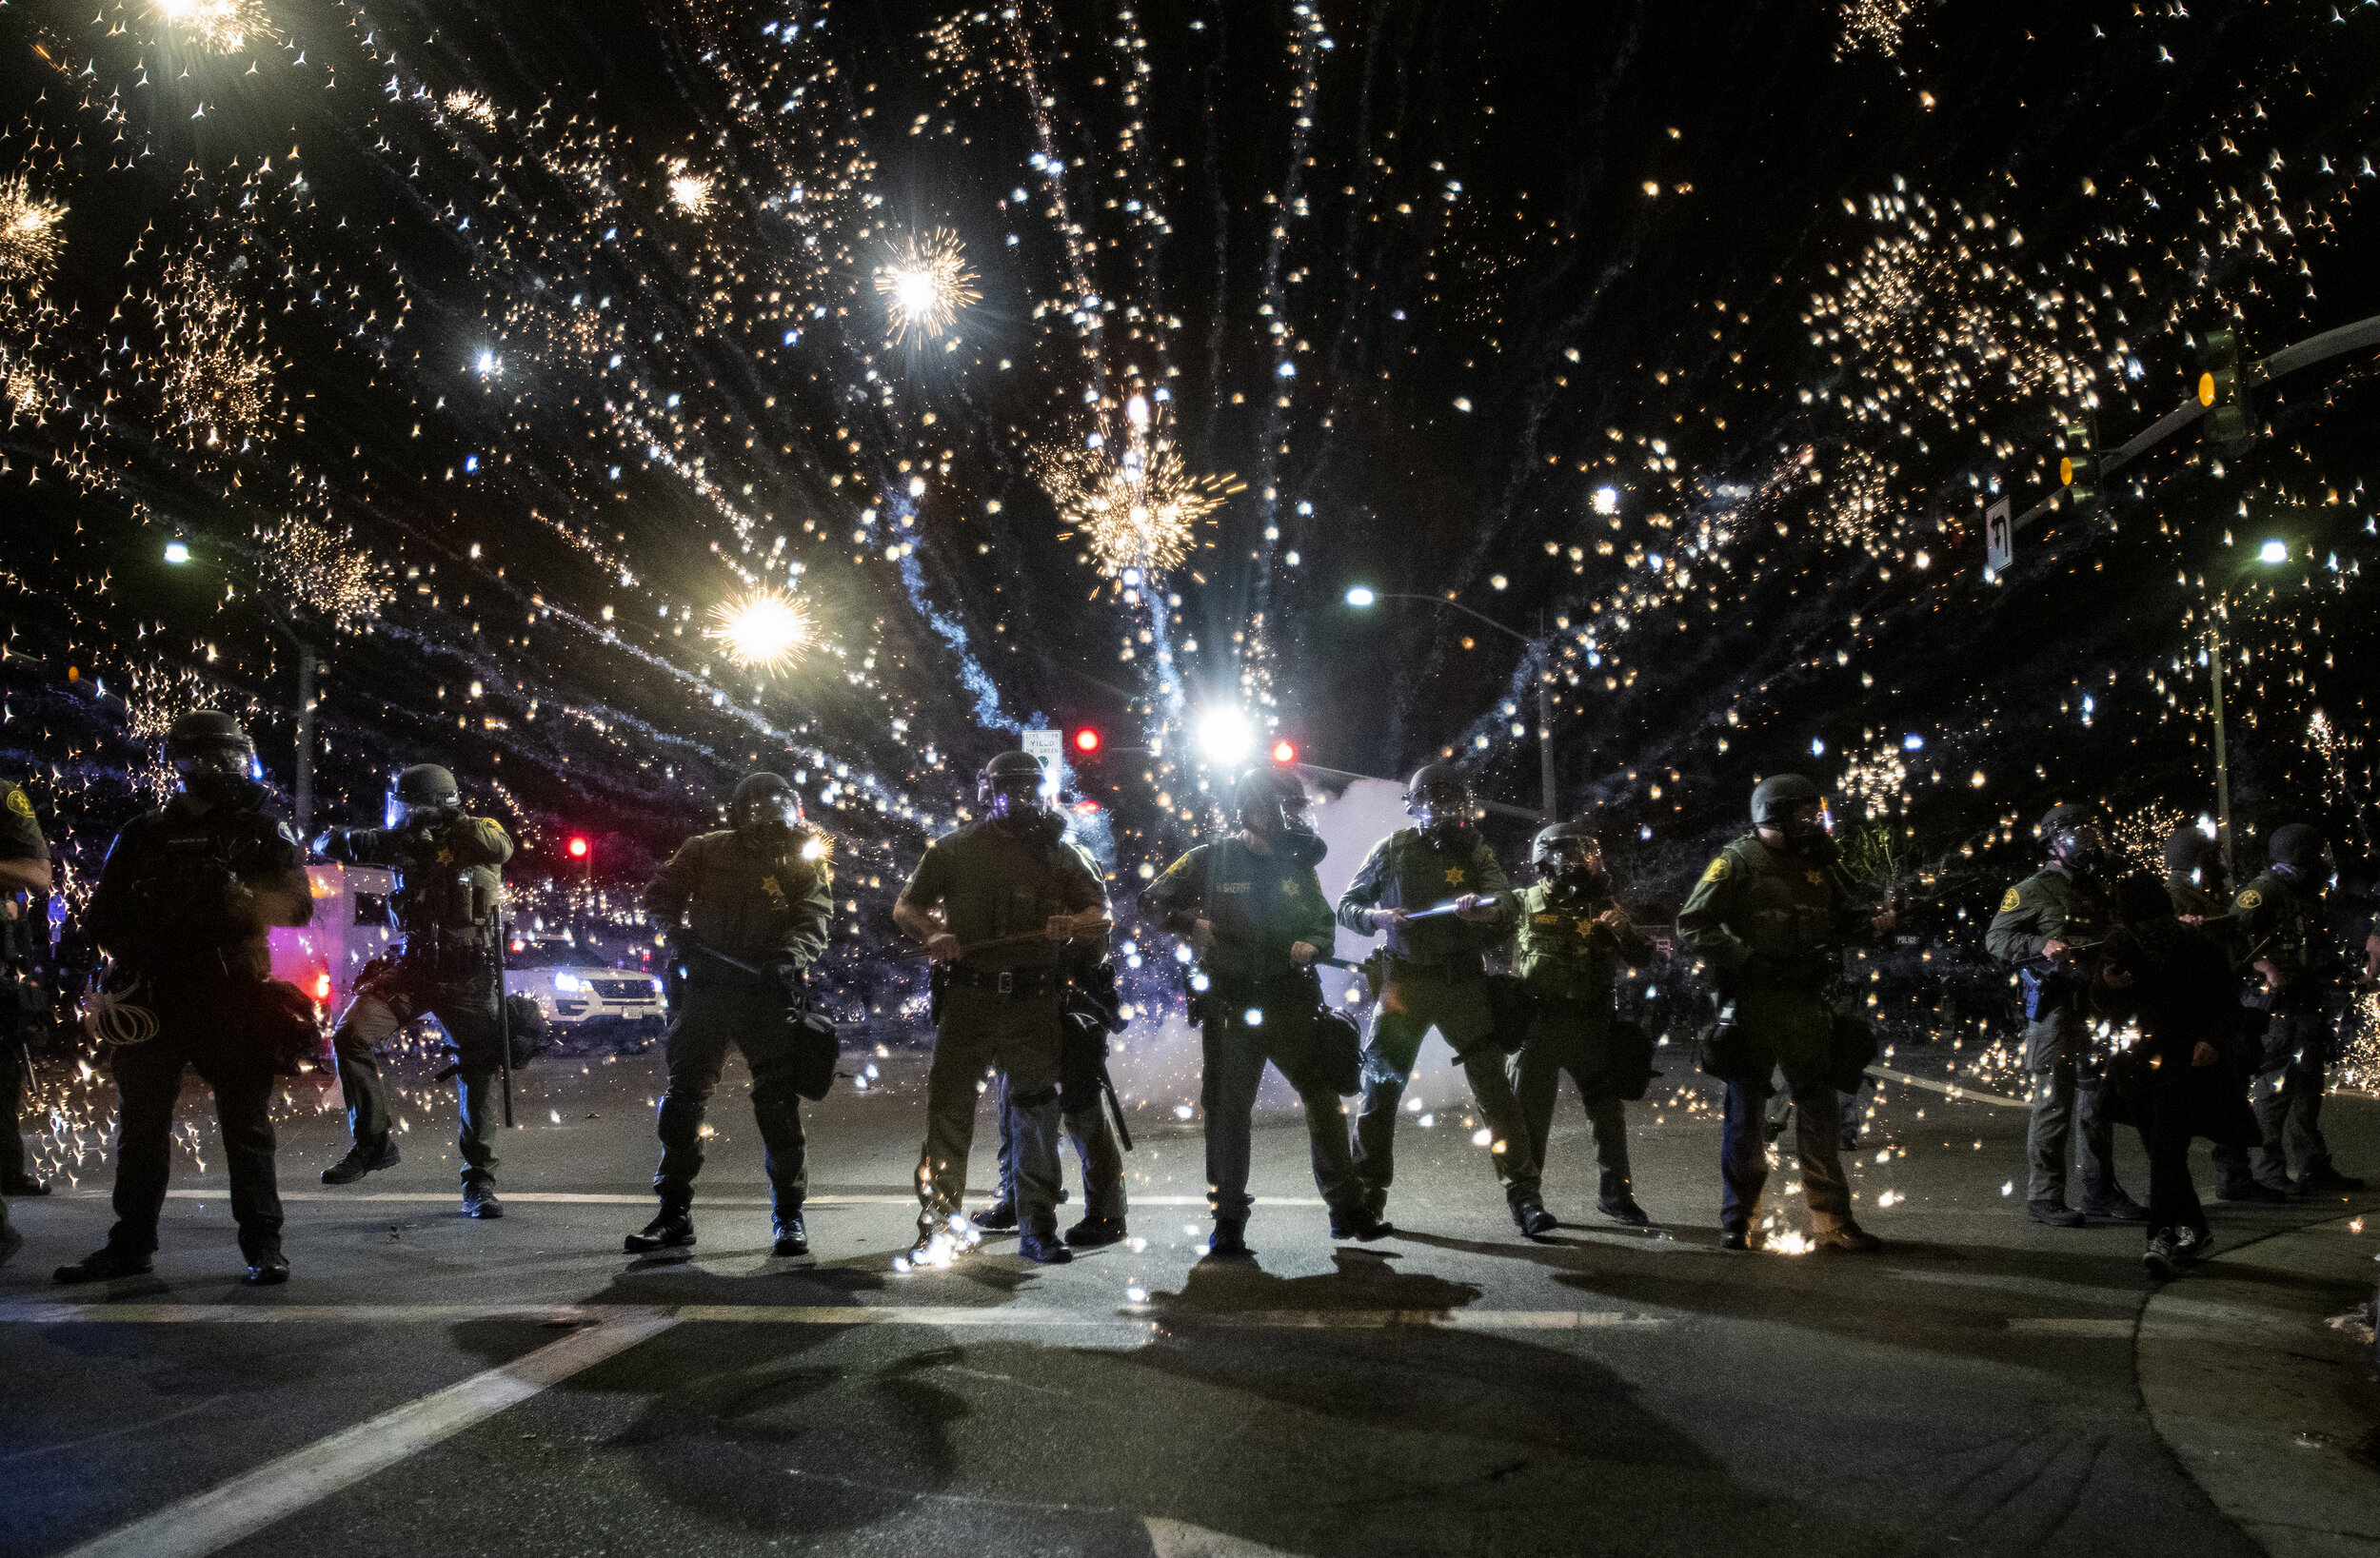  SANTA ANA, CA - MAY 30, 2020: Orange County Sheriff deputies maintain  a police block as a firecracker thrown by a protester explodes behind them during a protest against the Minneapolis police killing of George Floyd during the coronavirus pandemic